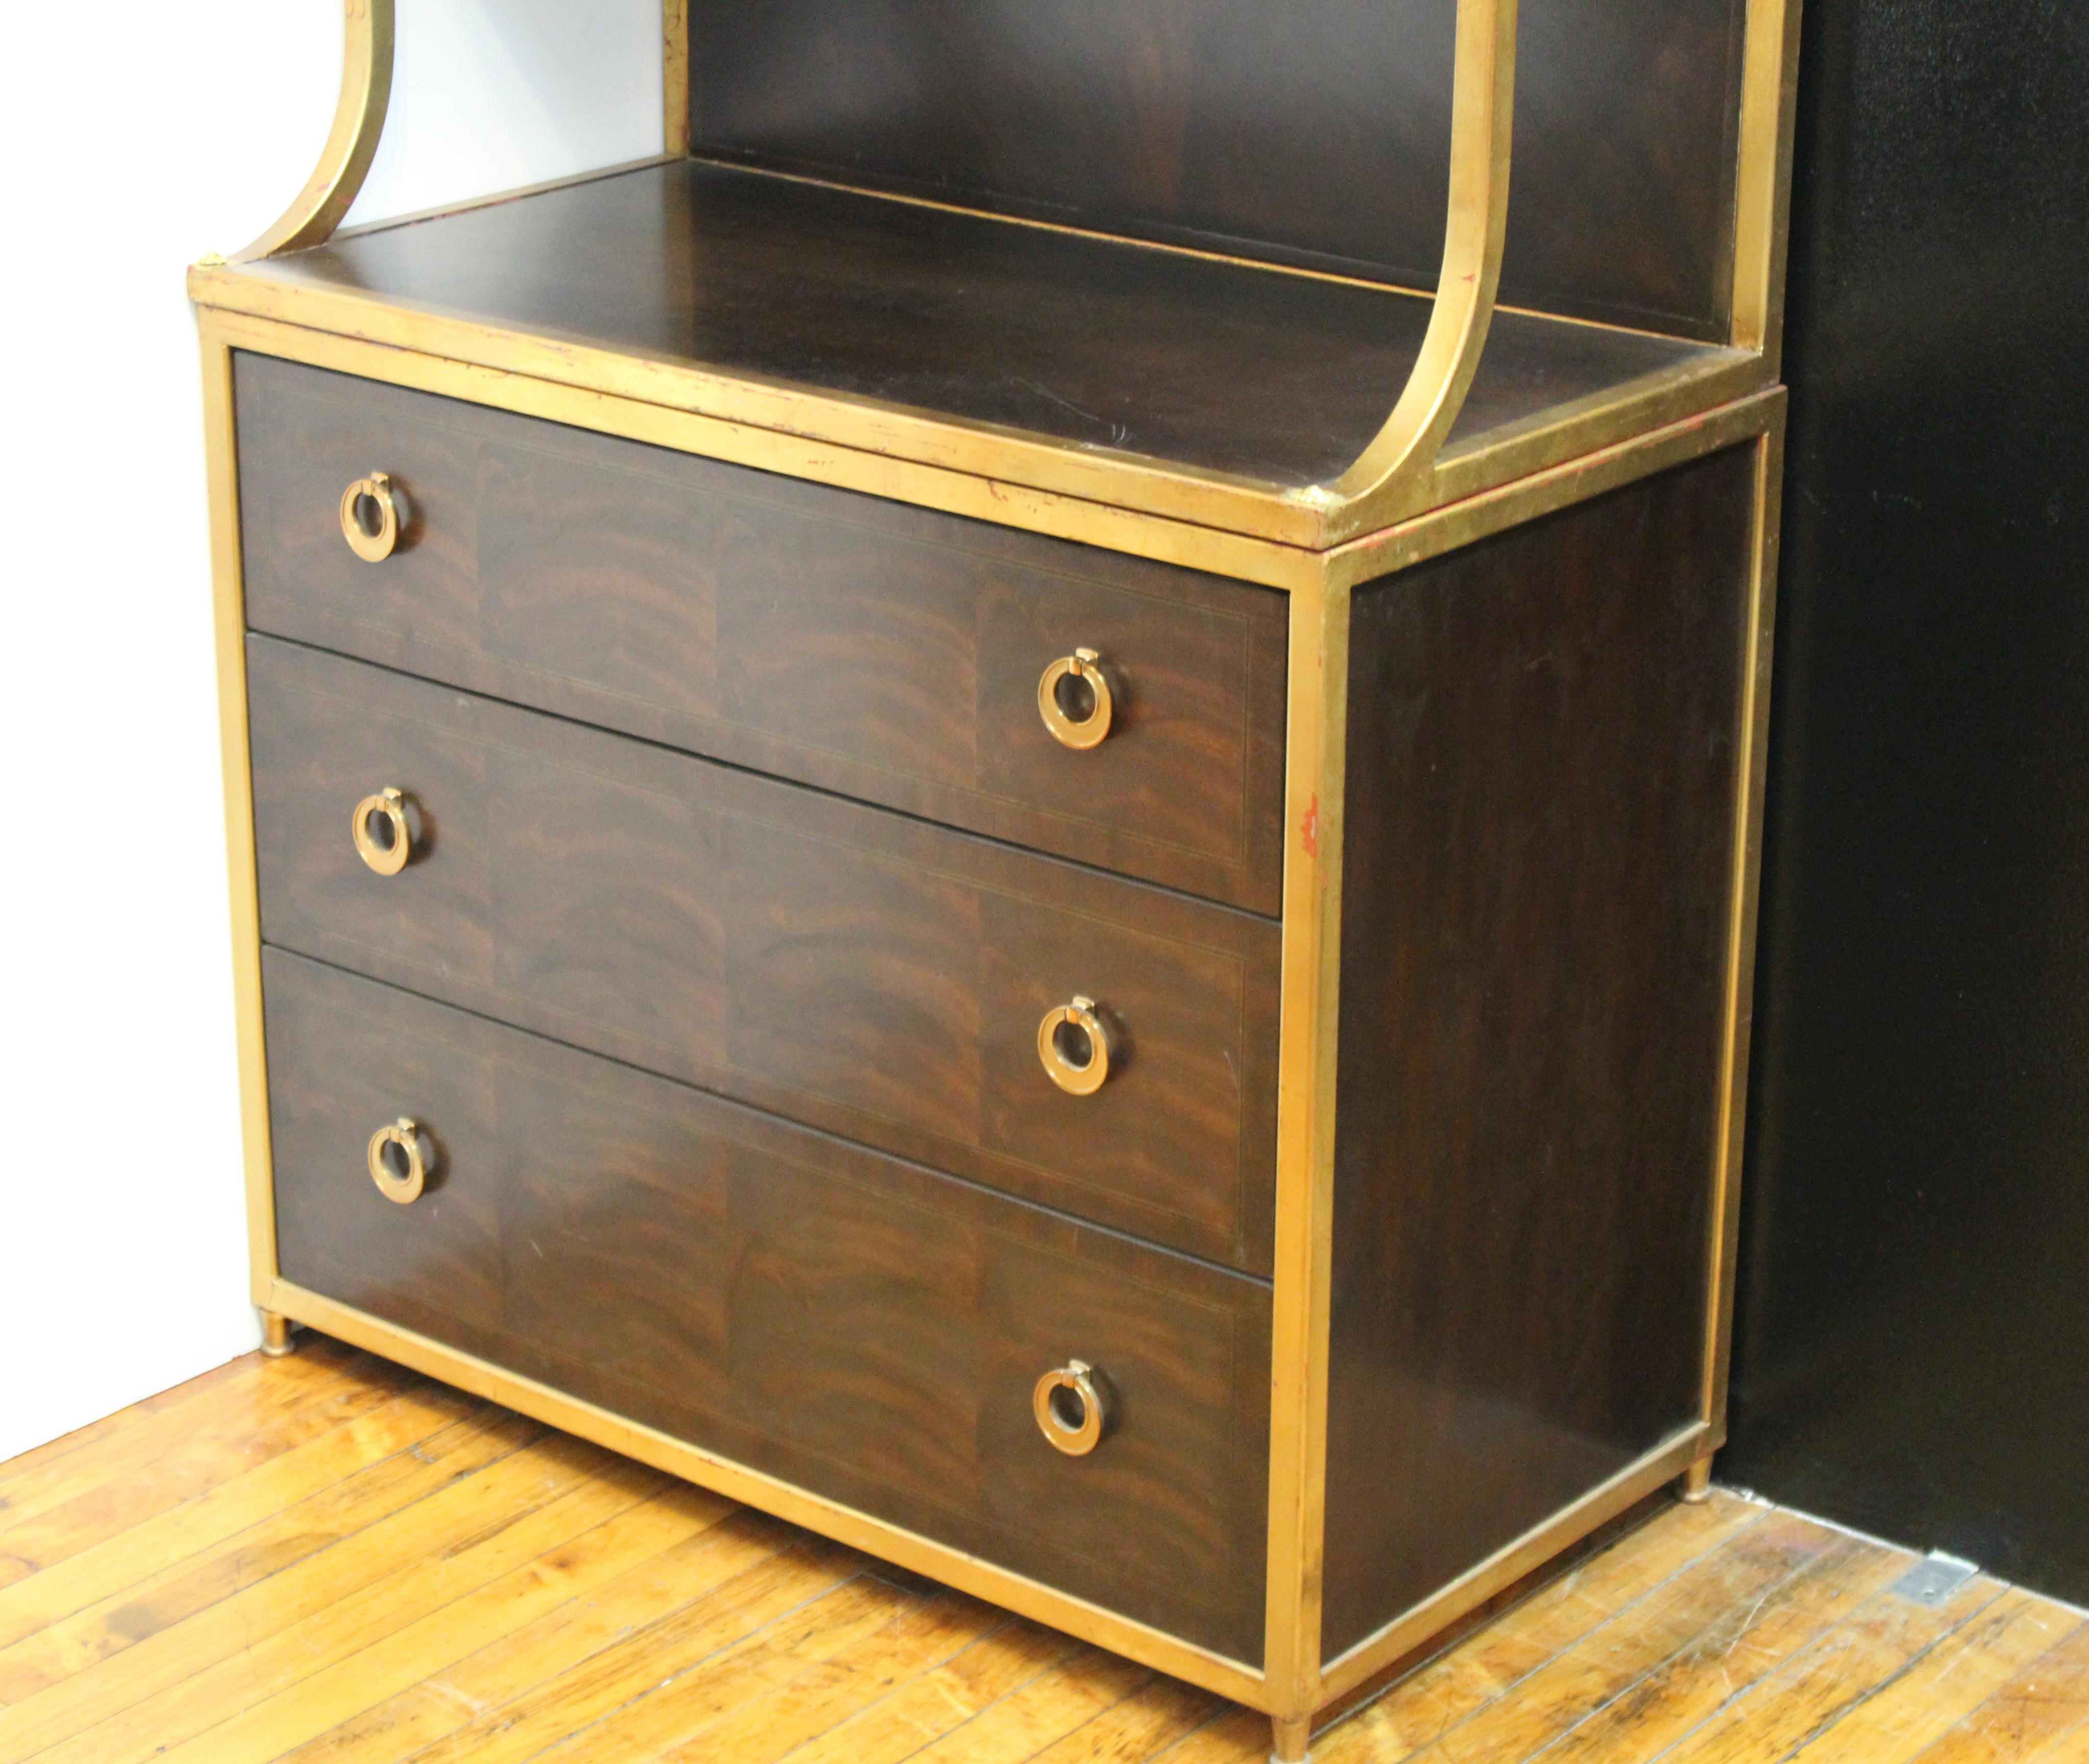 Drexel Heritage Art Deco style étagère and cabinet in mahogany wood and partially gilt surfaces. The piece has four levels of open shelving, which rest atop a chest of three drawers with gilt pulls. Makers plaque inside top drawer. In great vintage